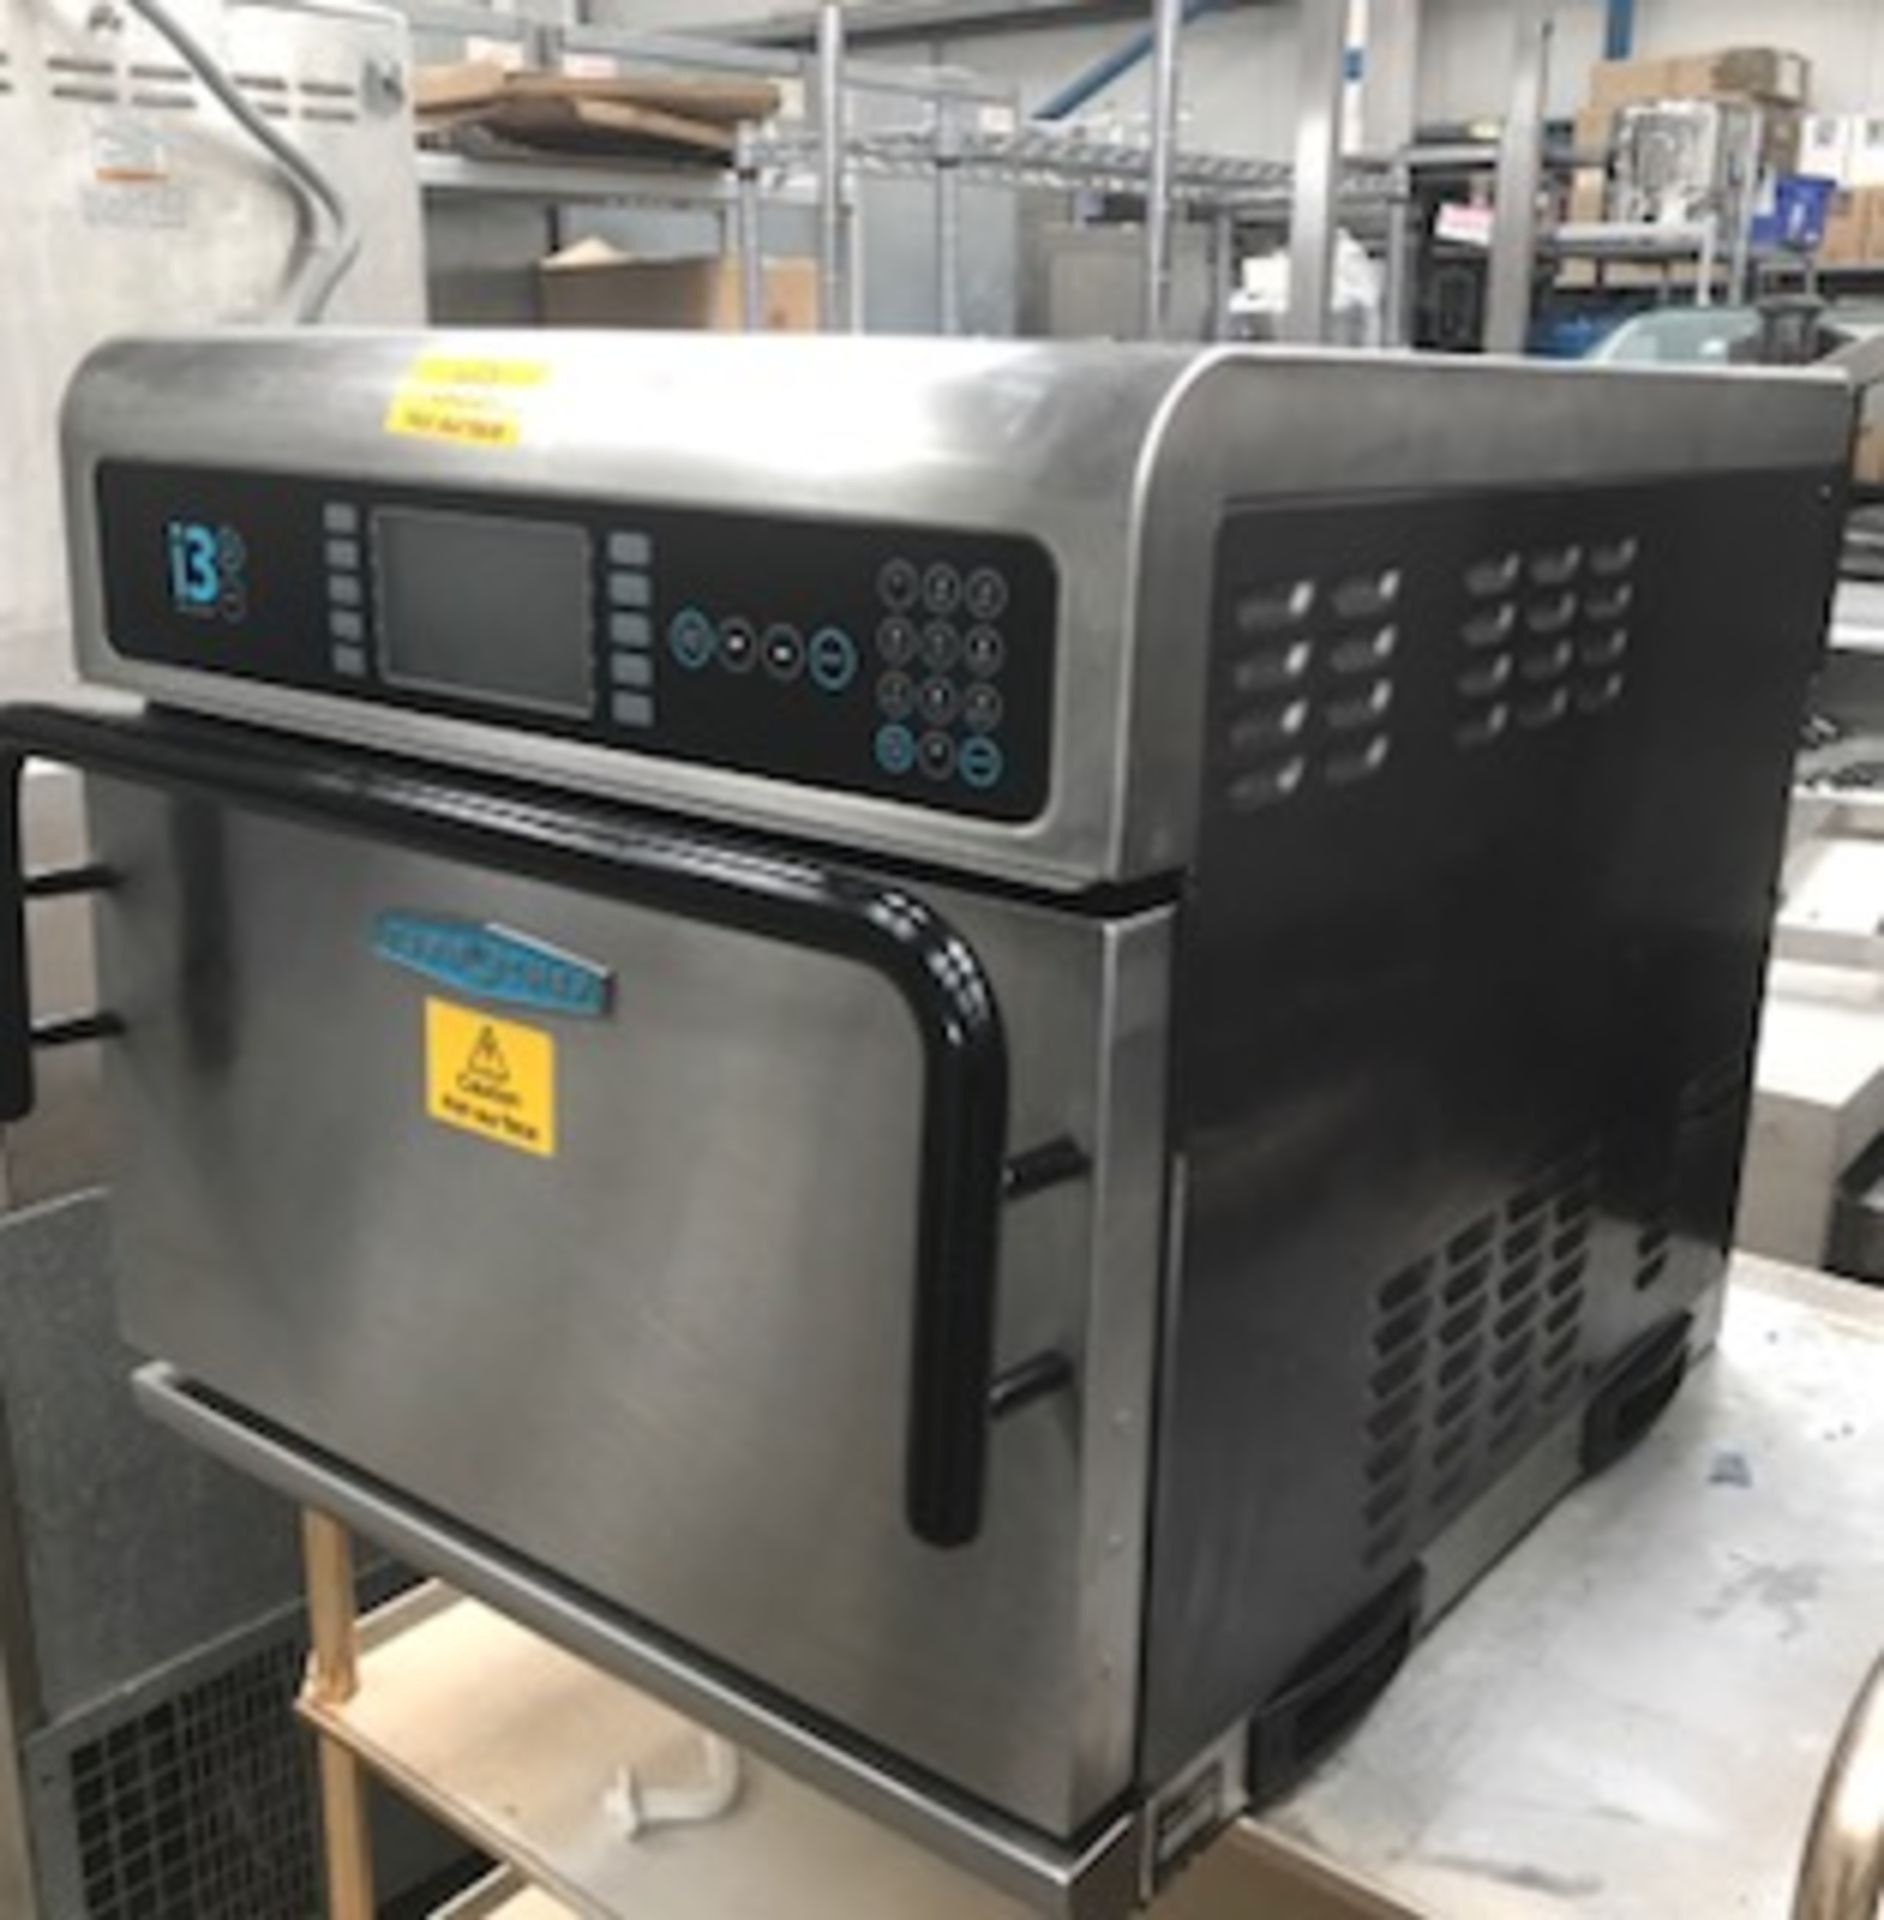 TurboChef I3 TurboChef Electric convection Oven Used but in great condition, prepared and taken care - Image 3 of 3